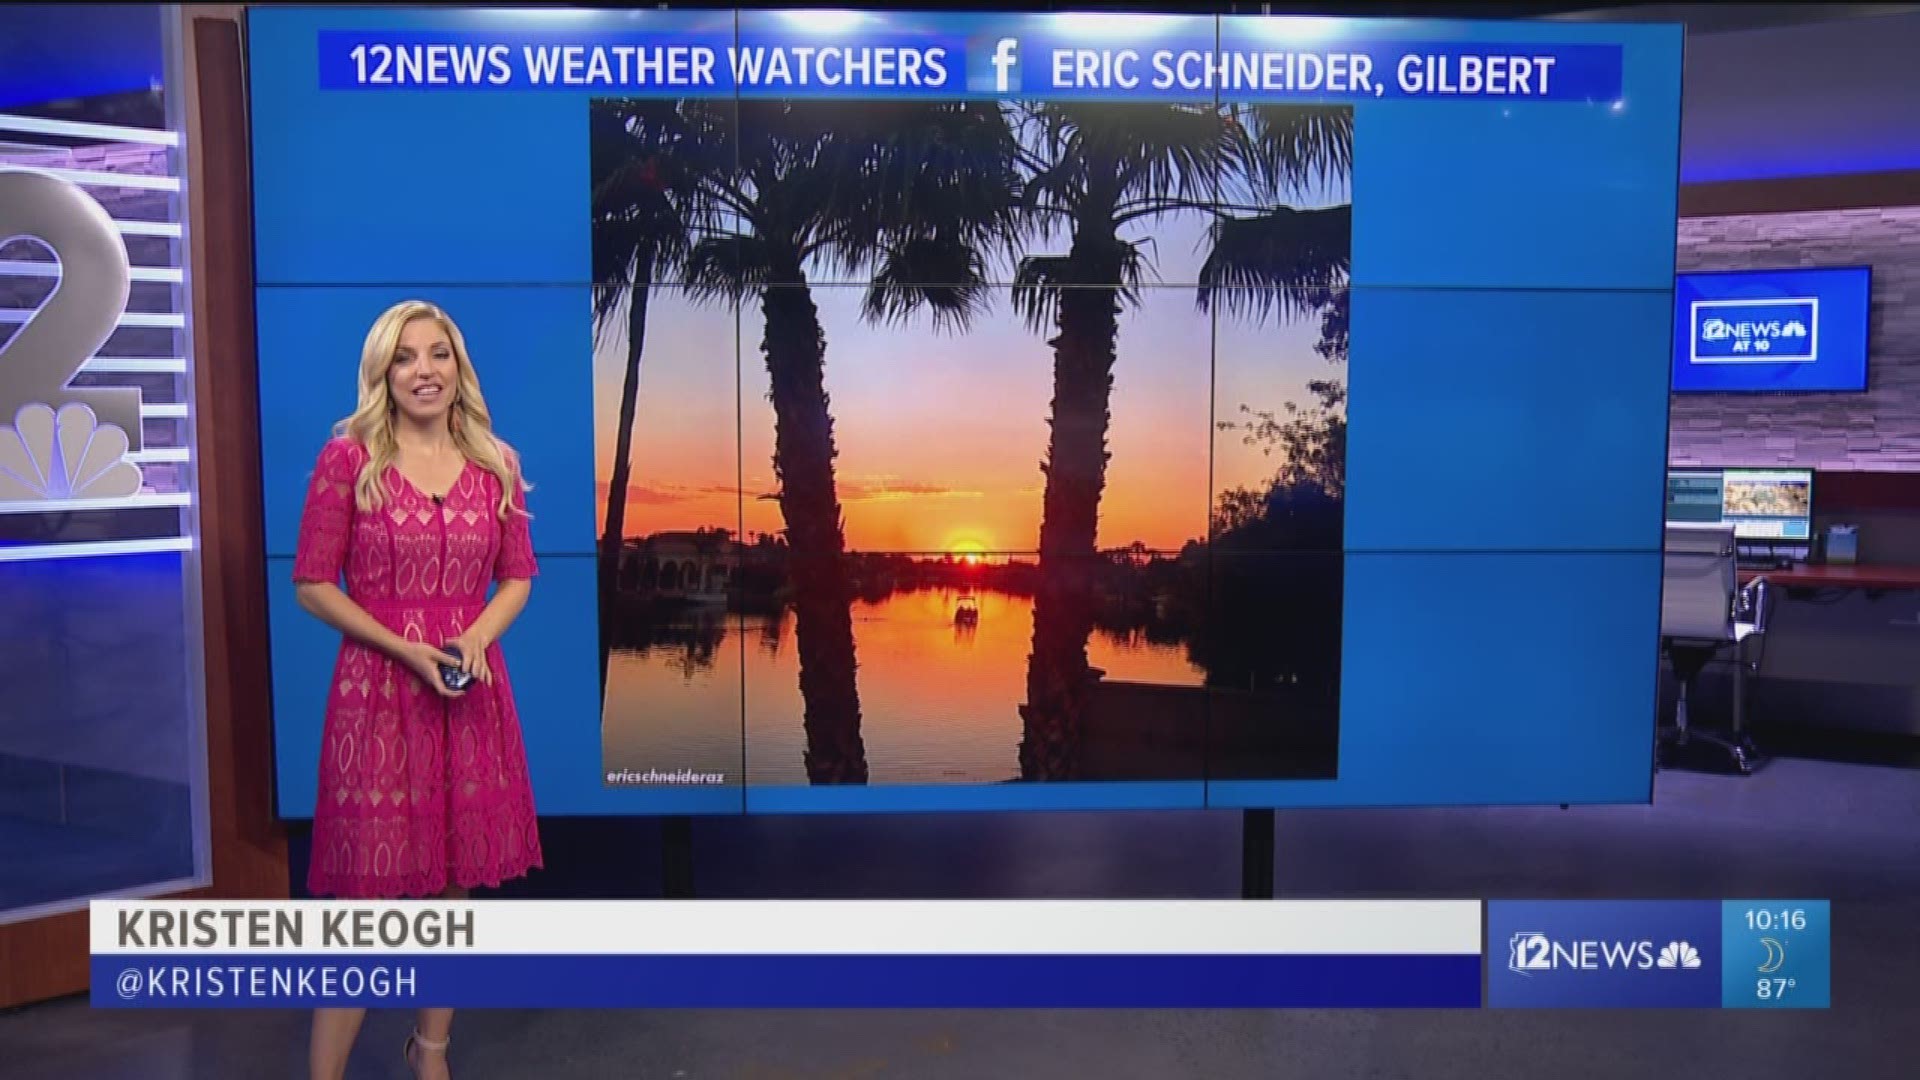 Kristen Keogh shows a photo by 12 News Weather Watcher Eric Schneider. Join the 12 News Weather Watchers group on Facebook!